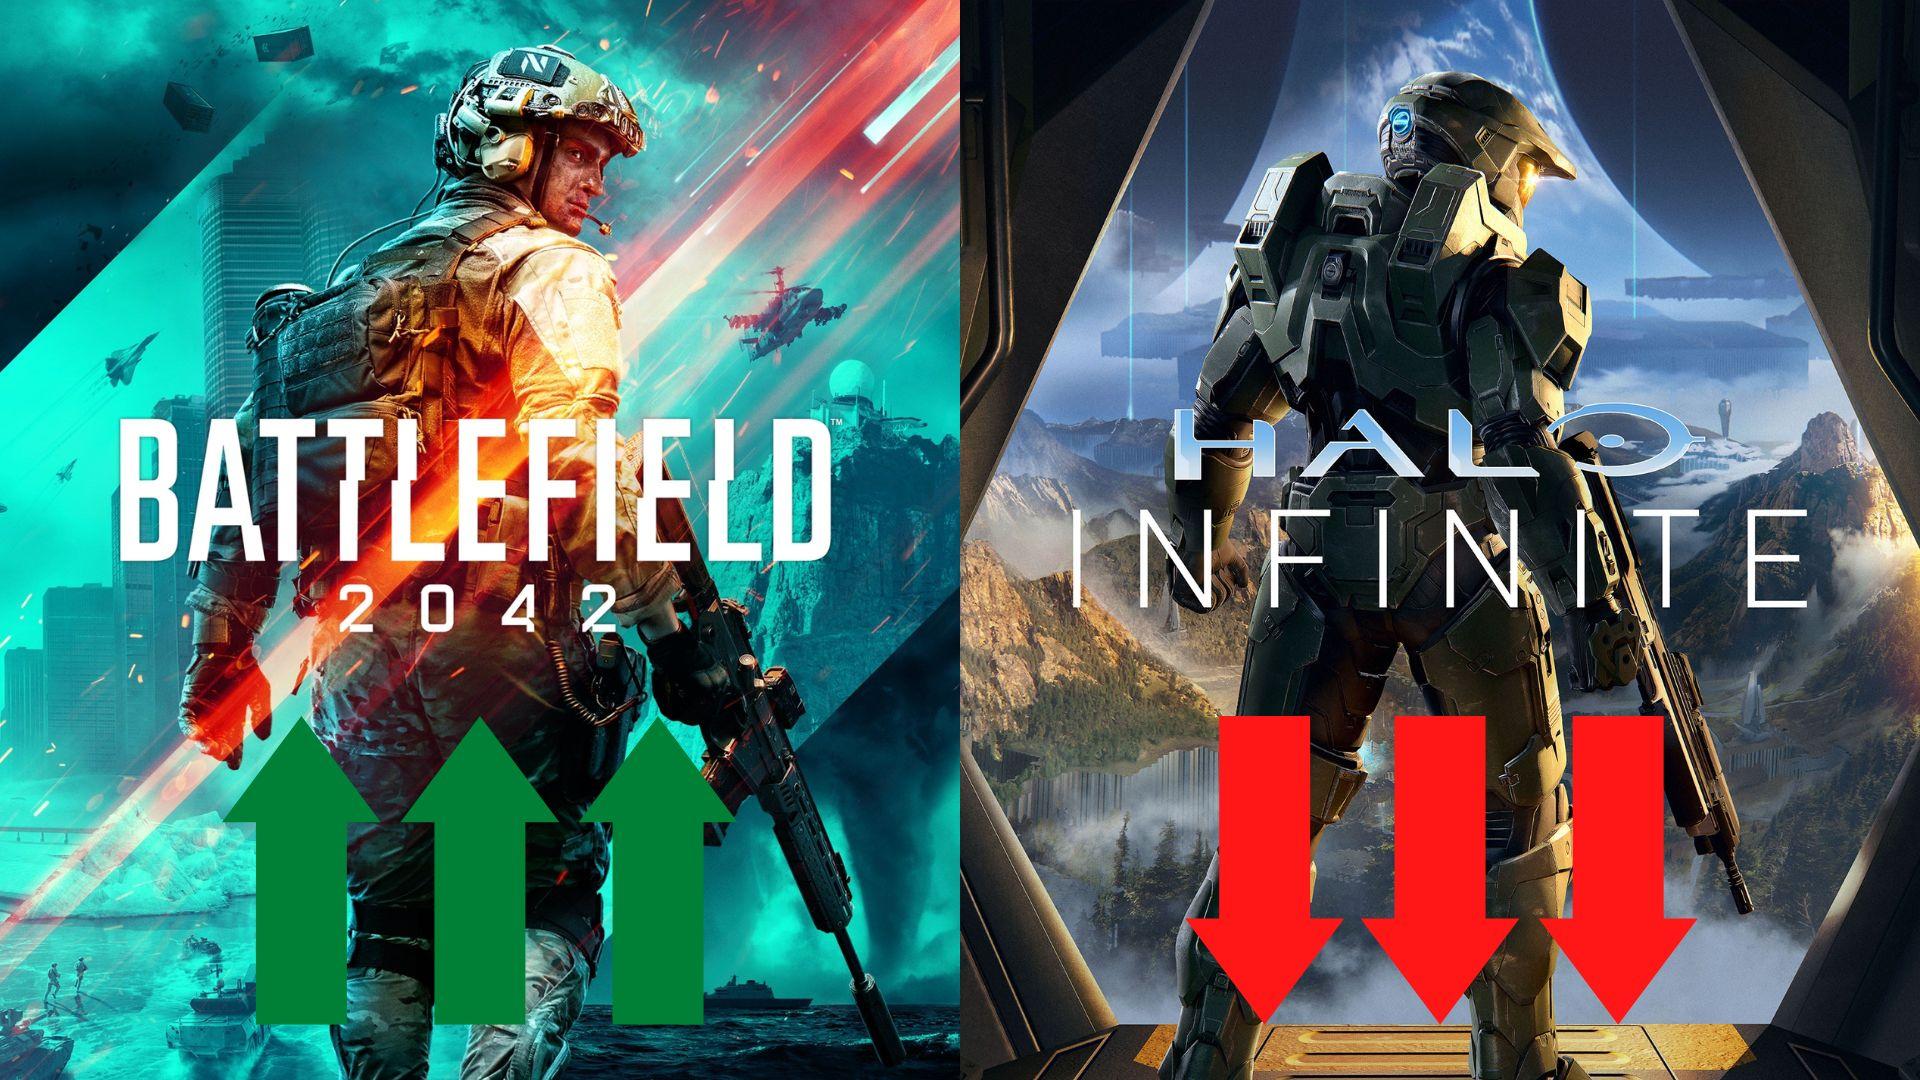 battlefield 2042 and halo infinite cover art